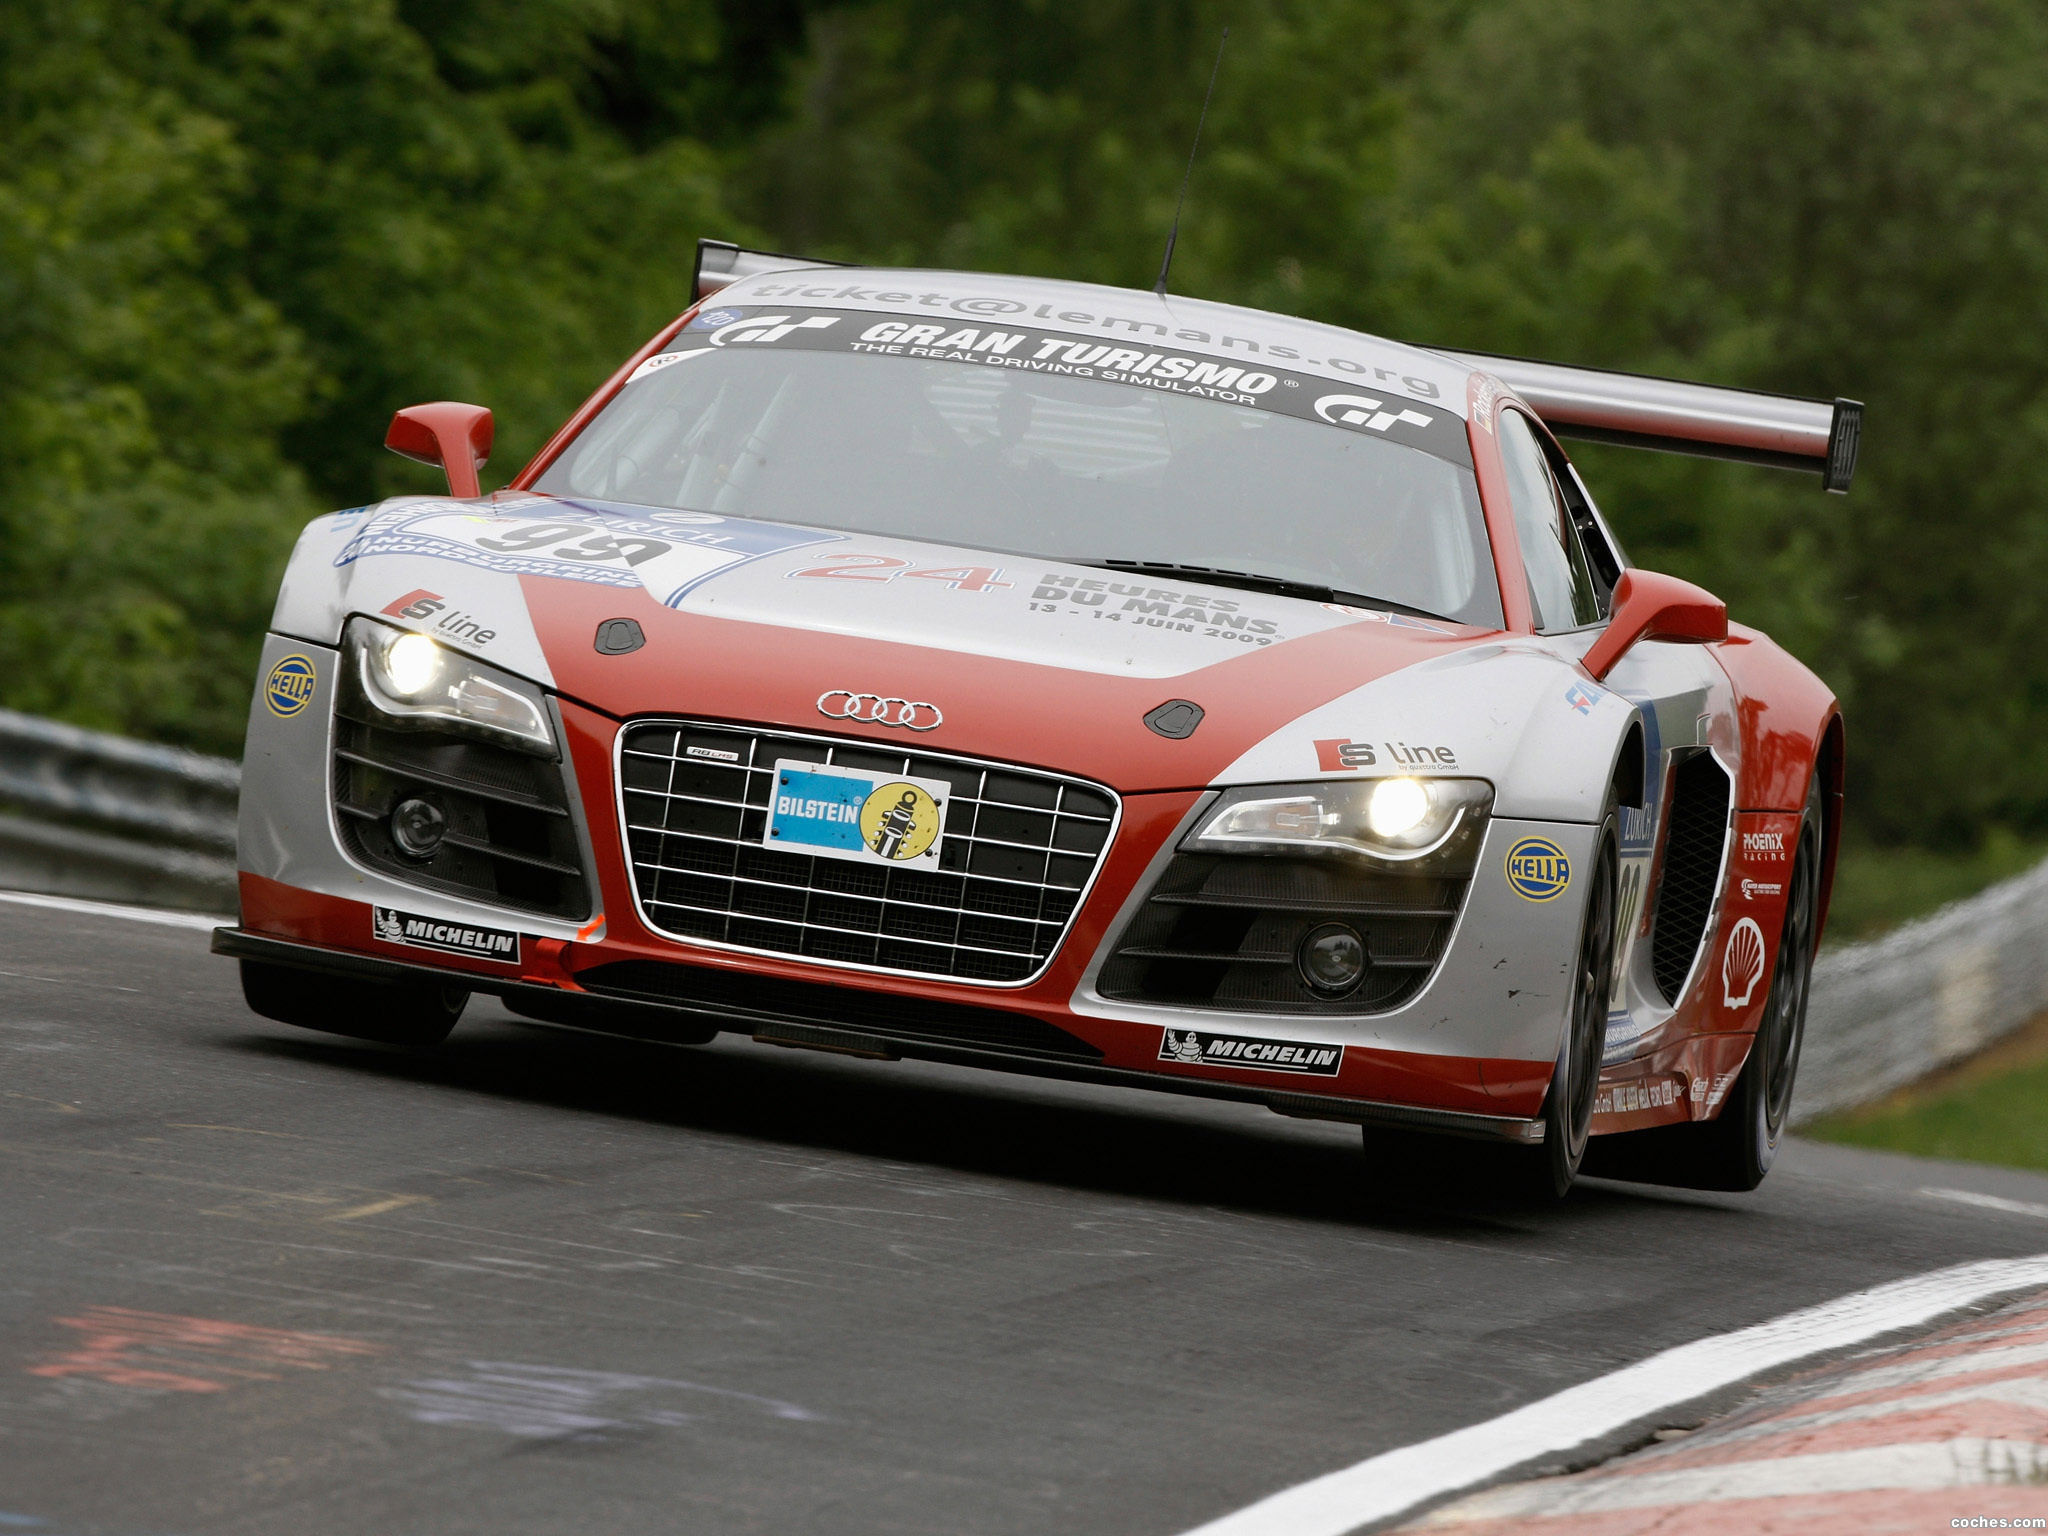 Unrivaled Luxury And Performance: The 2009 Audi R8 LMS